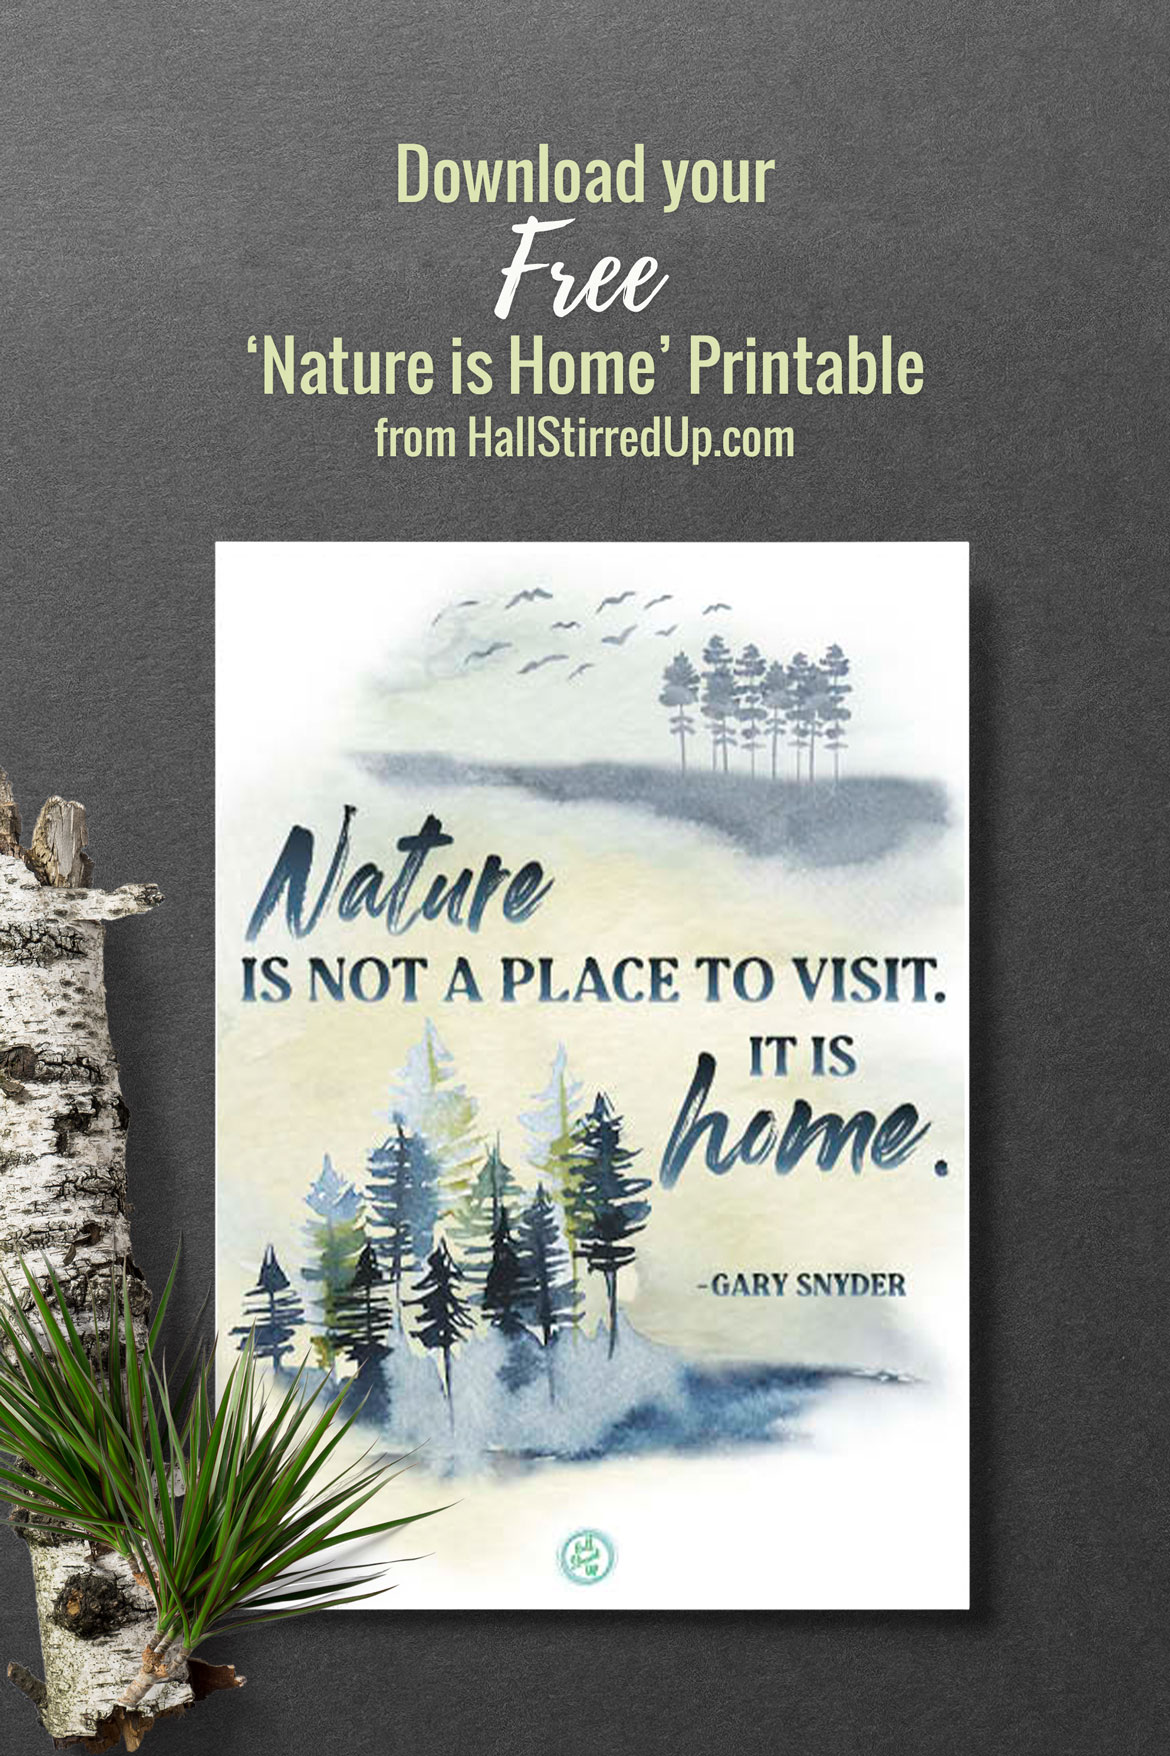 Come home to nature - Best at Every Age and a bonus free printable